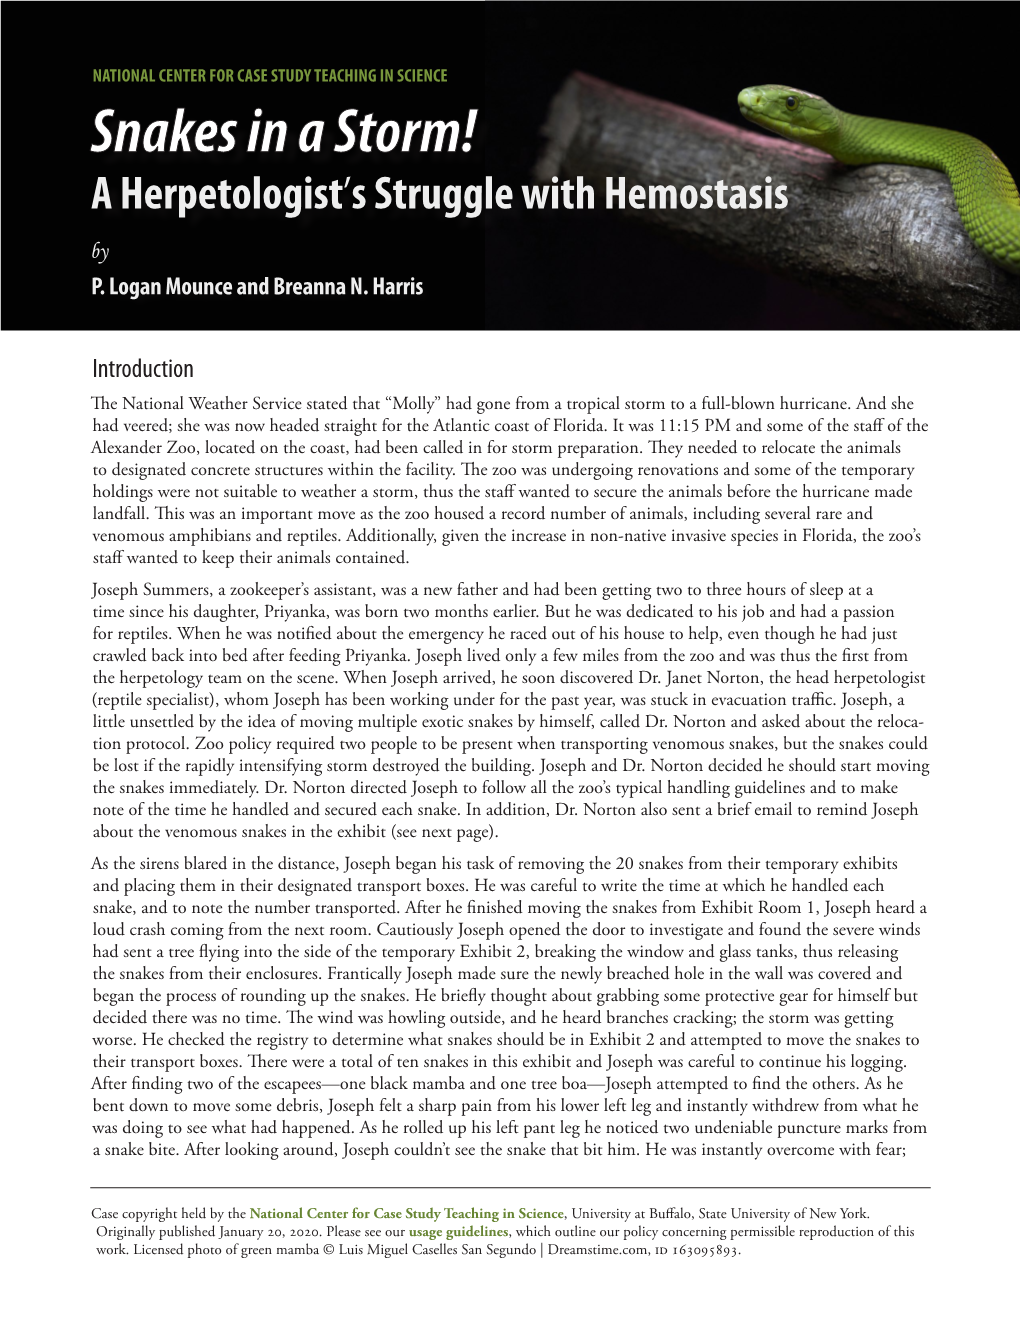 Snakes in a Storm! a Herpetologist's Struggle with Hemostasis